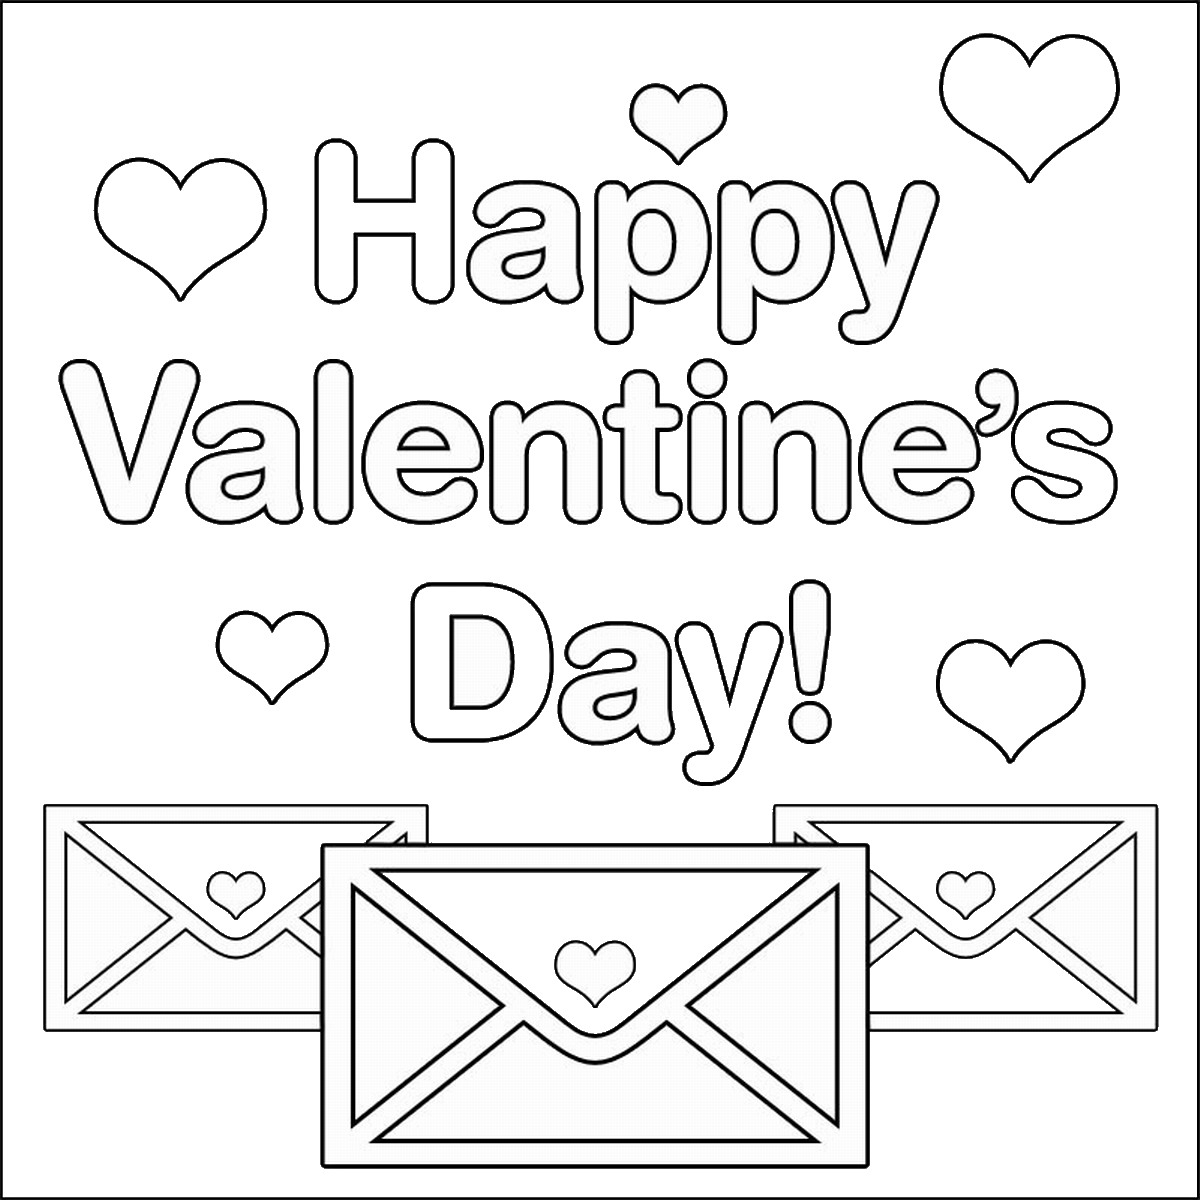 List Of Valentine's Day Coloring Pages Printable Ideas